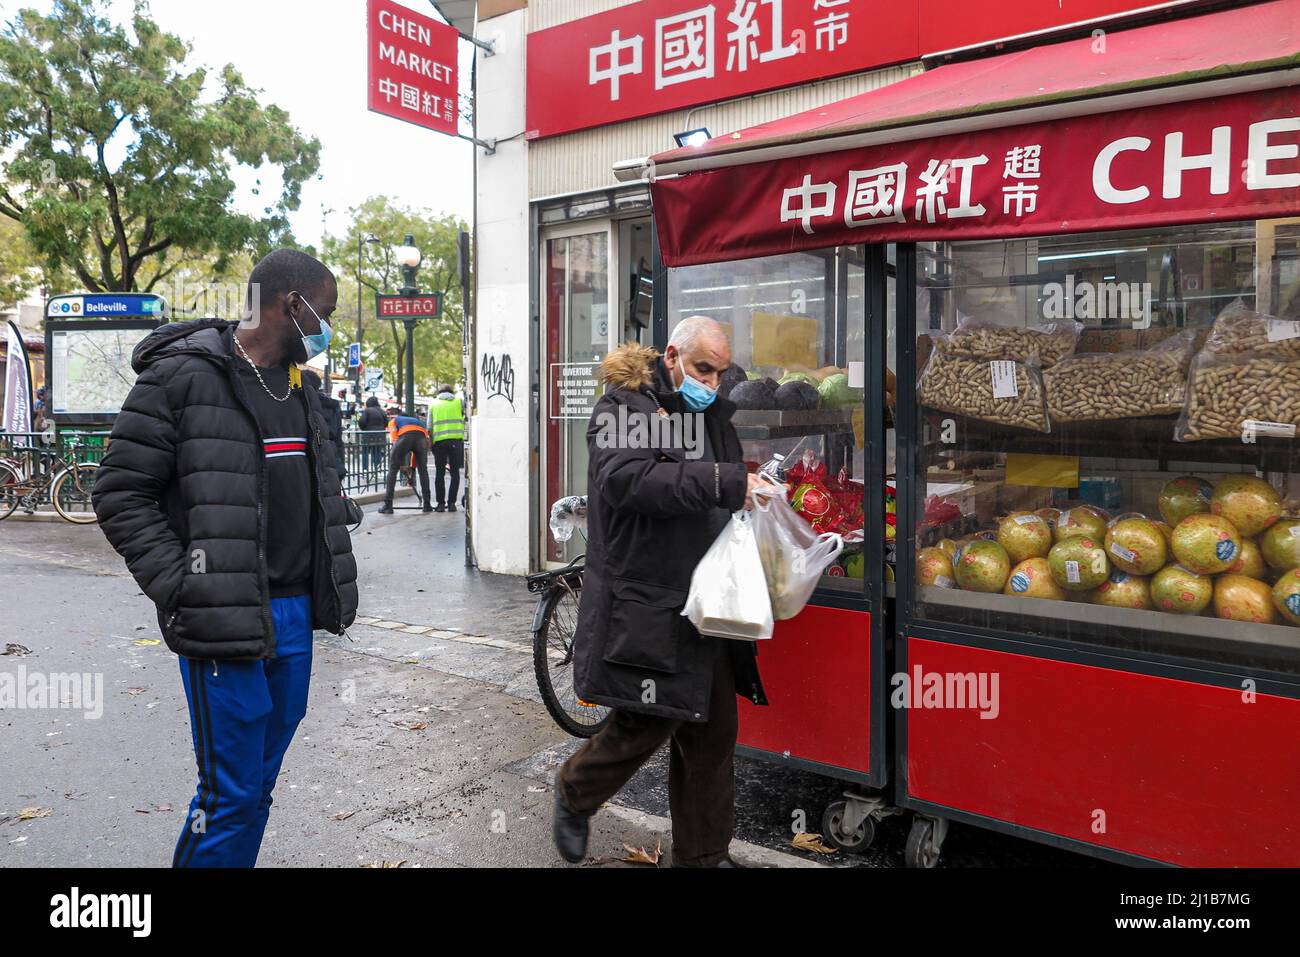 CHINESE NEIGHBORHOOD AT THE EXIT OF THE BELLEVILLE METRO STATION, PARIS 20TH ARRONDISSEMENT, FRANCE Stock Photo